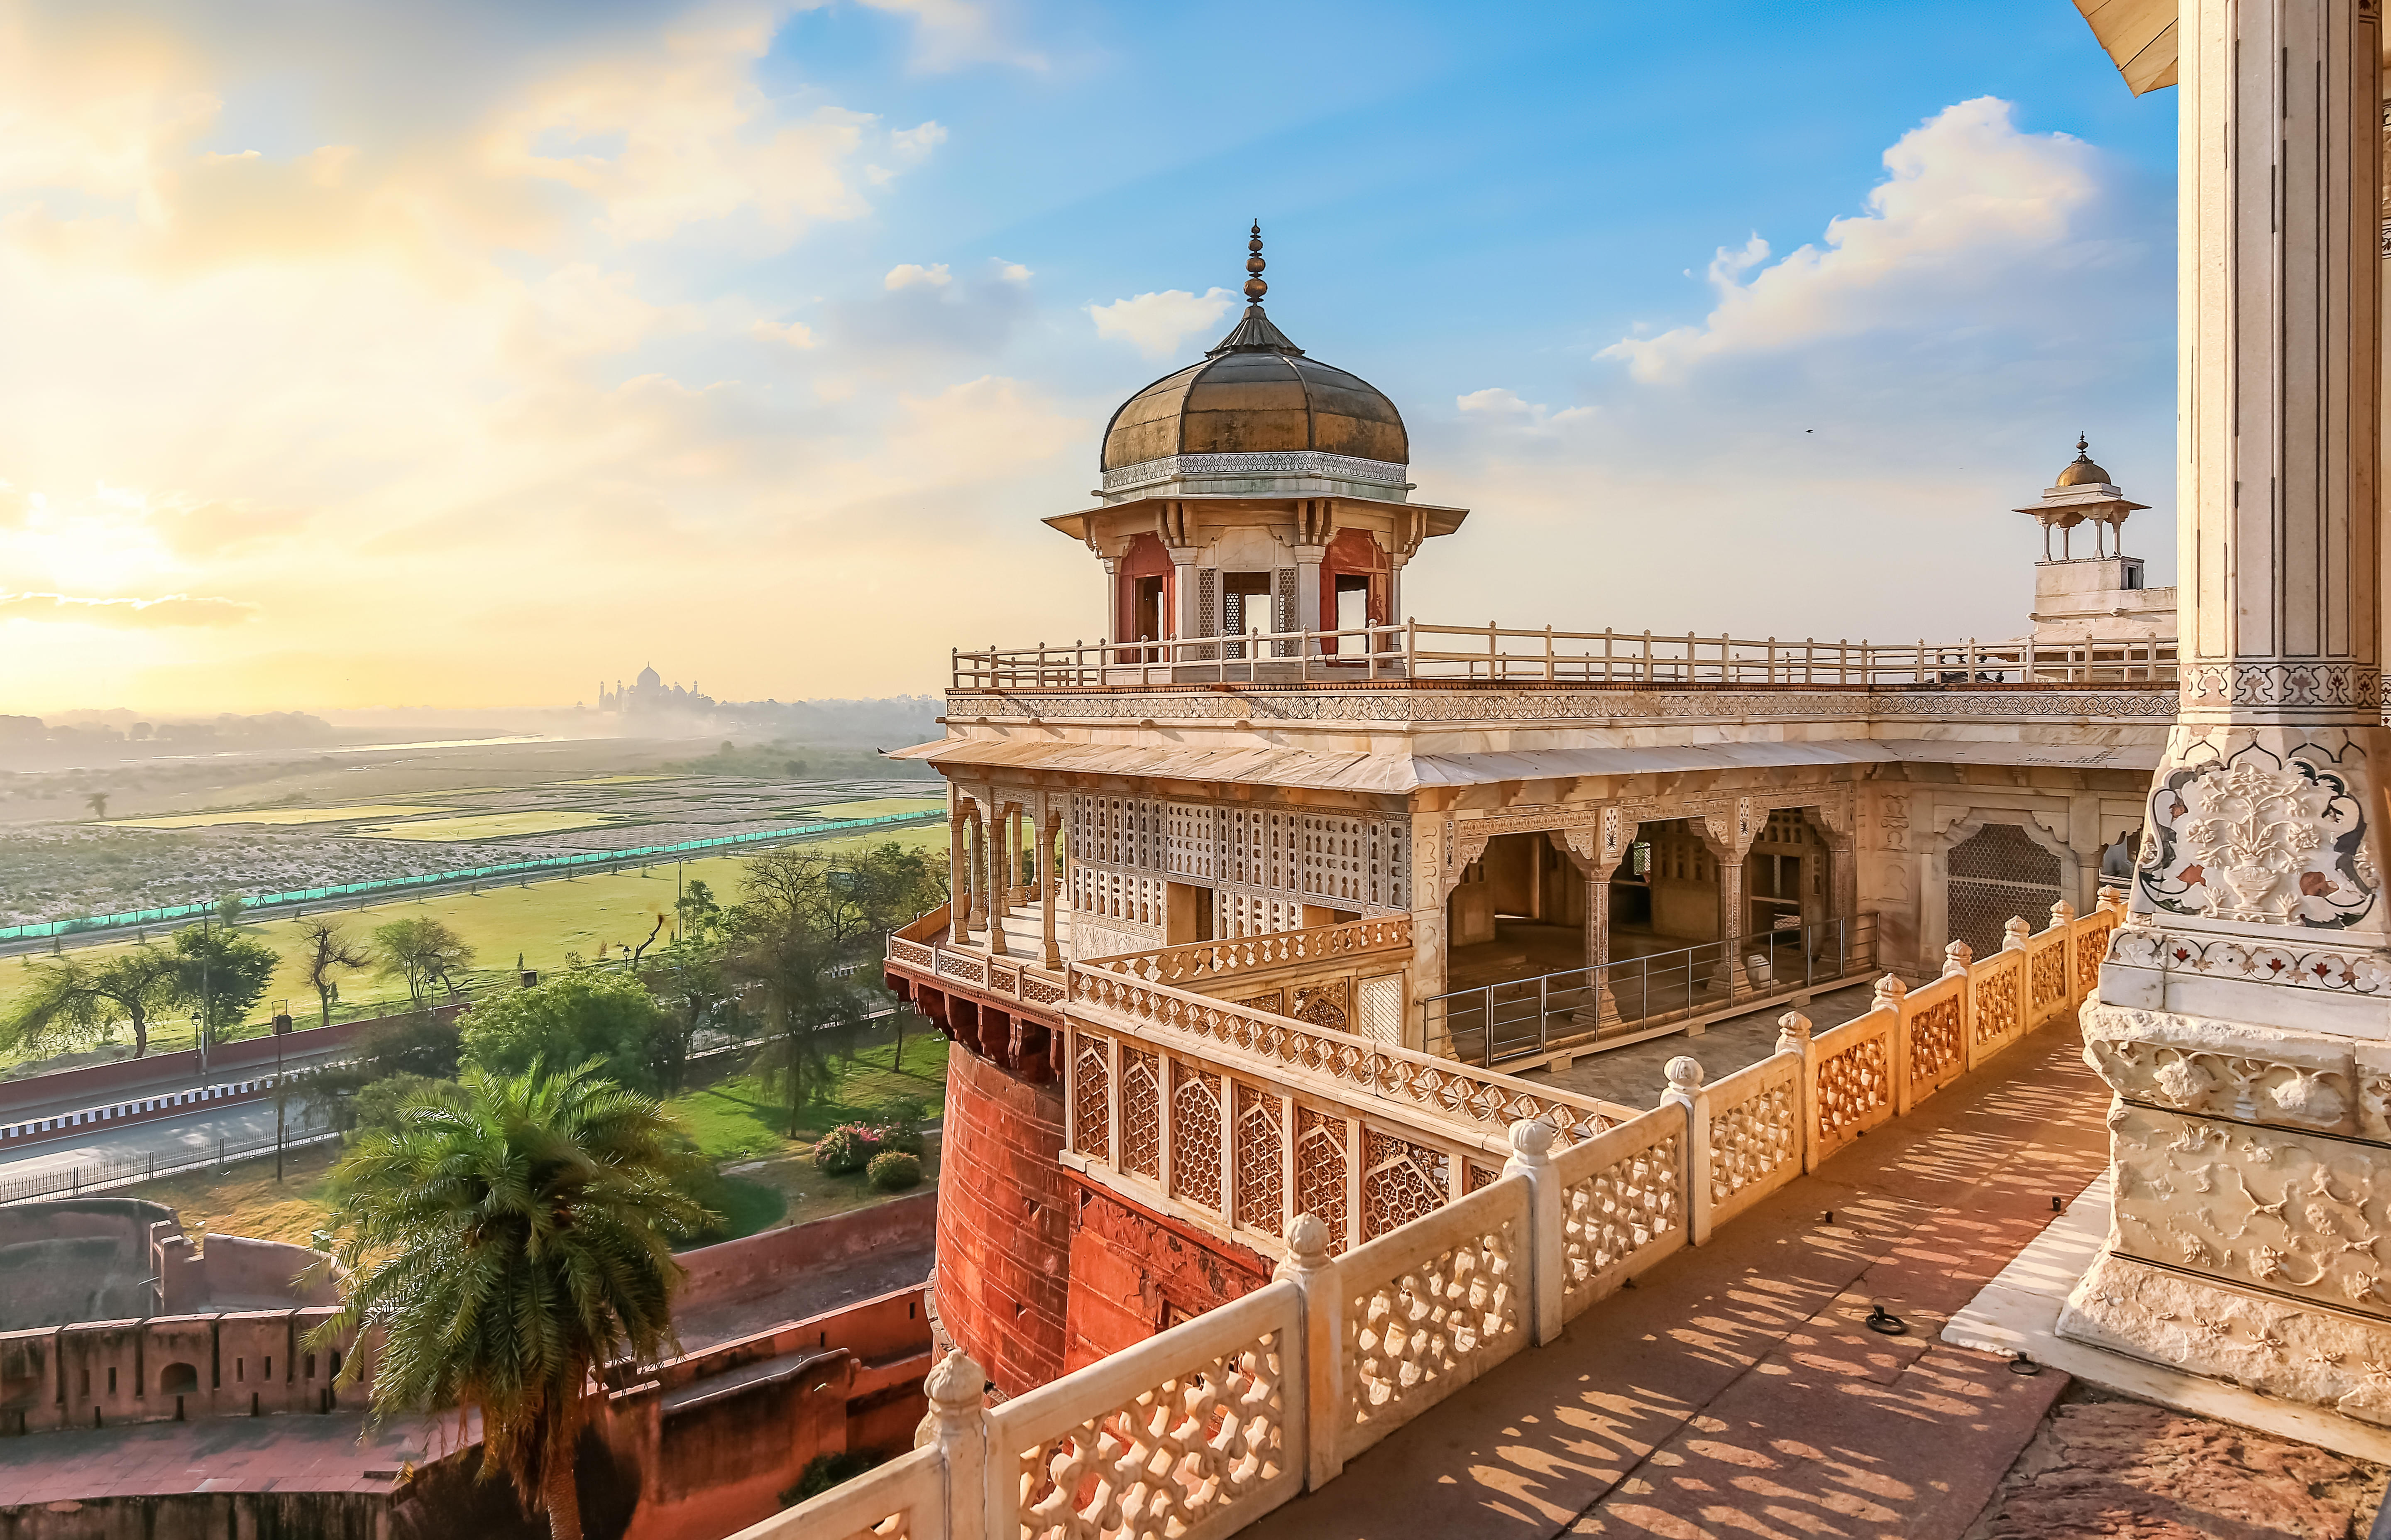 Things to Do in Agra